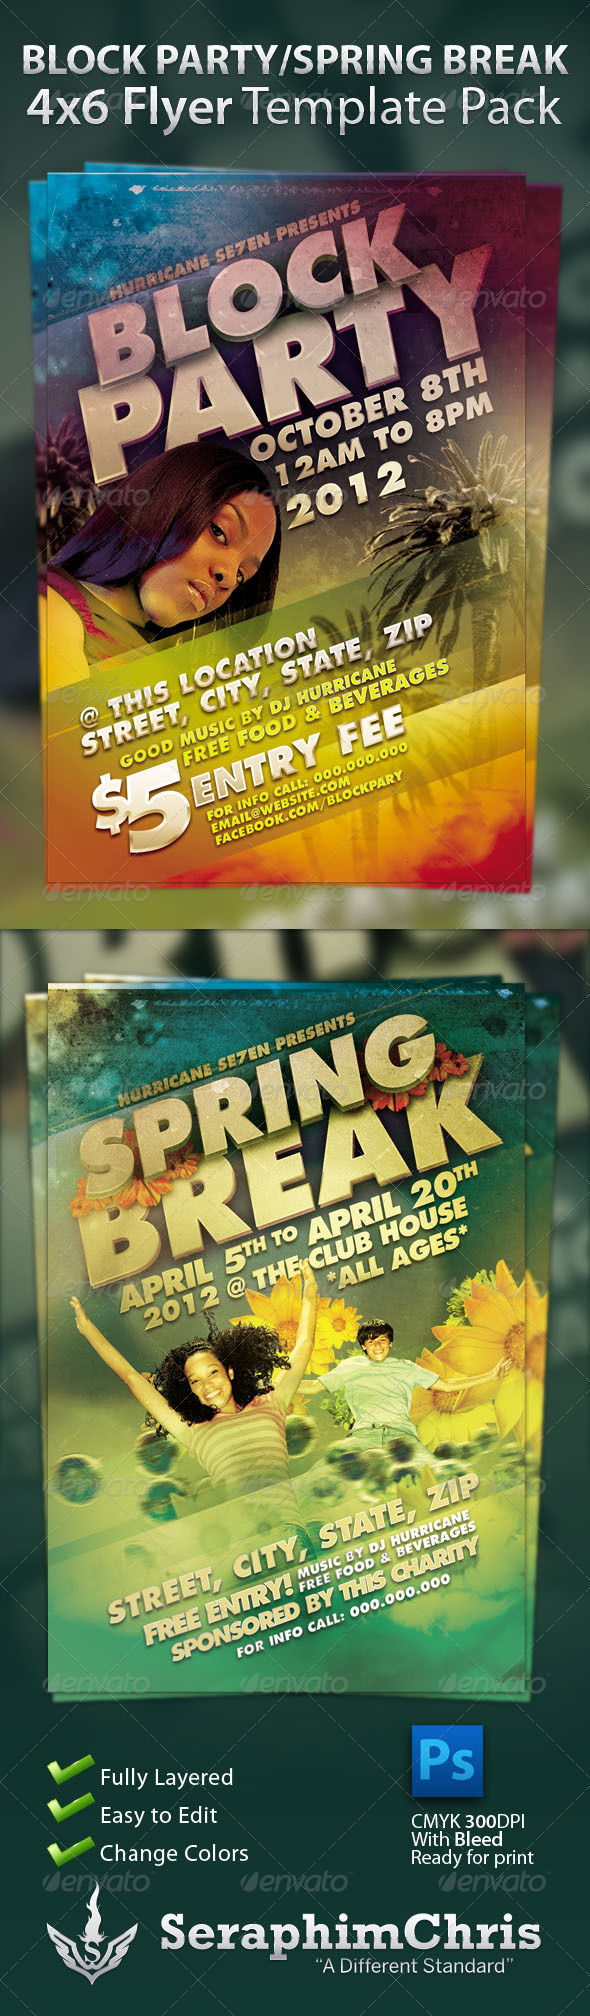 Block Party and Spring Break Flyer Template Pack